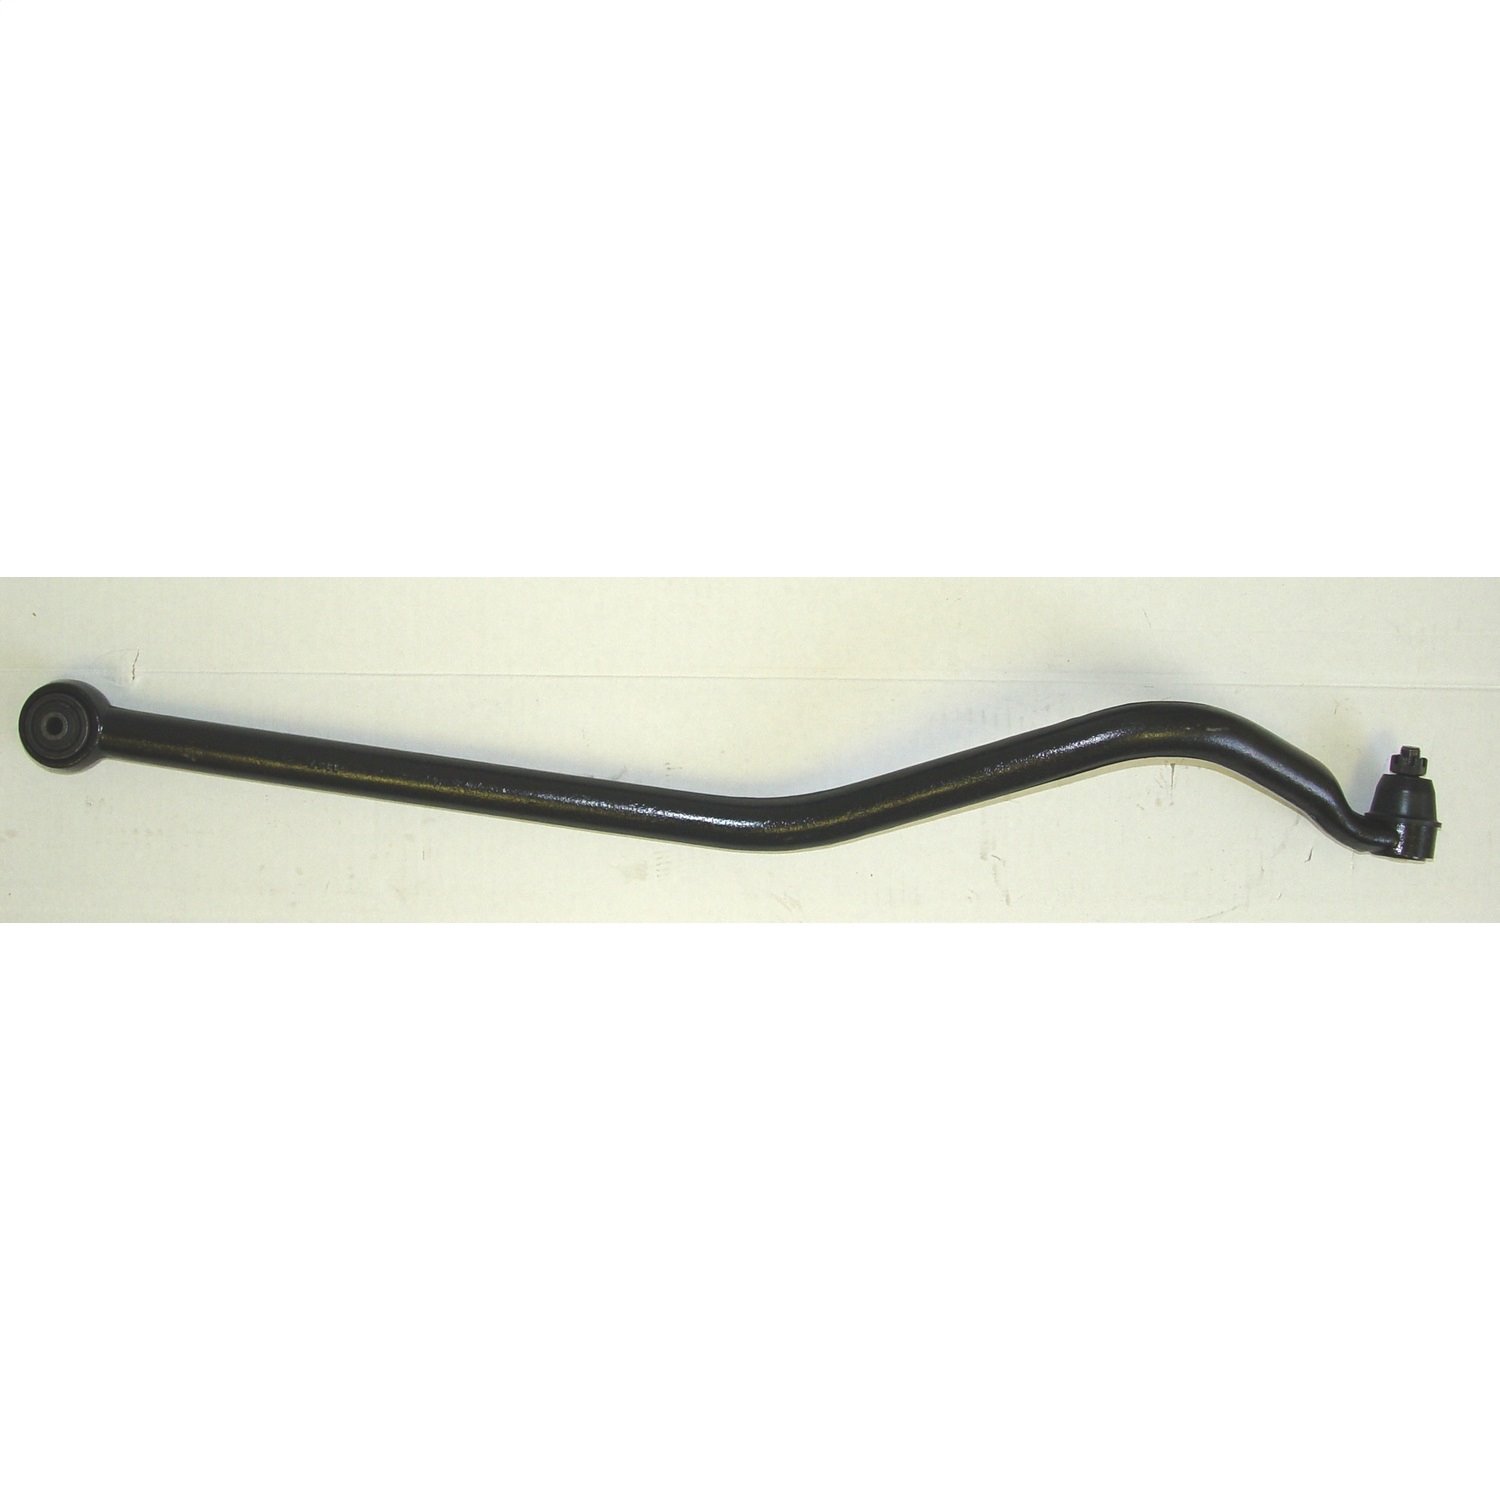 Stock replacement front trackbar from Omix-ADA, Fits 91-01